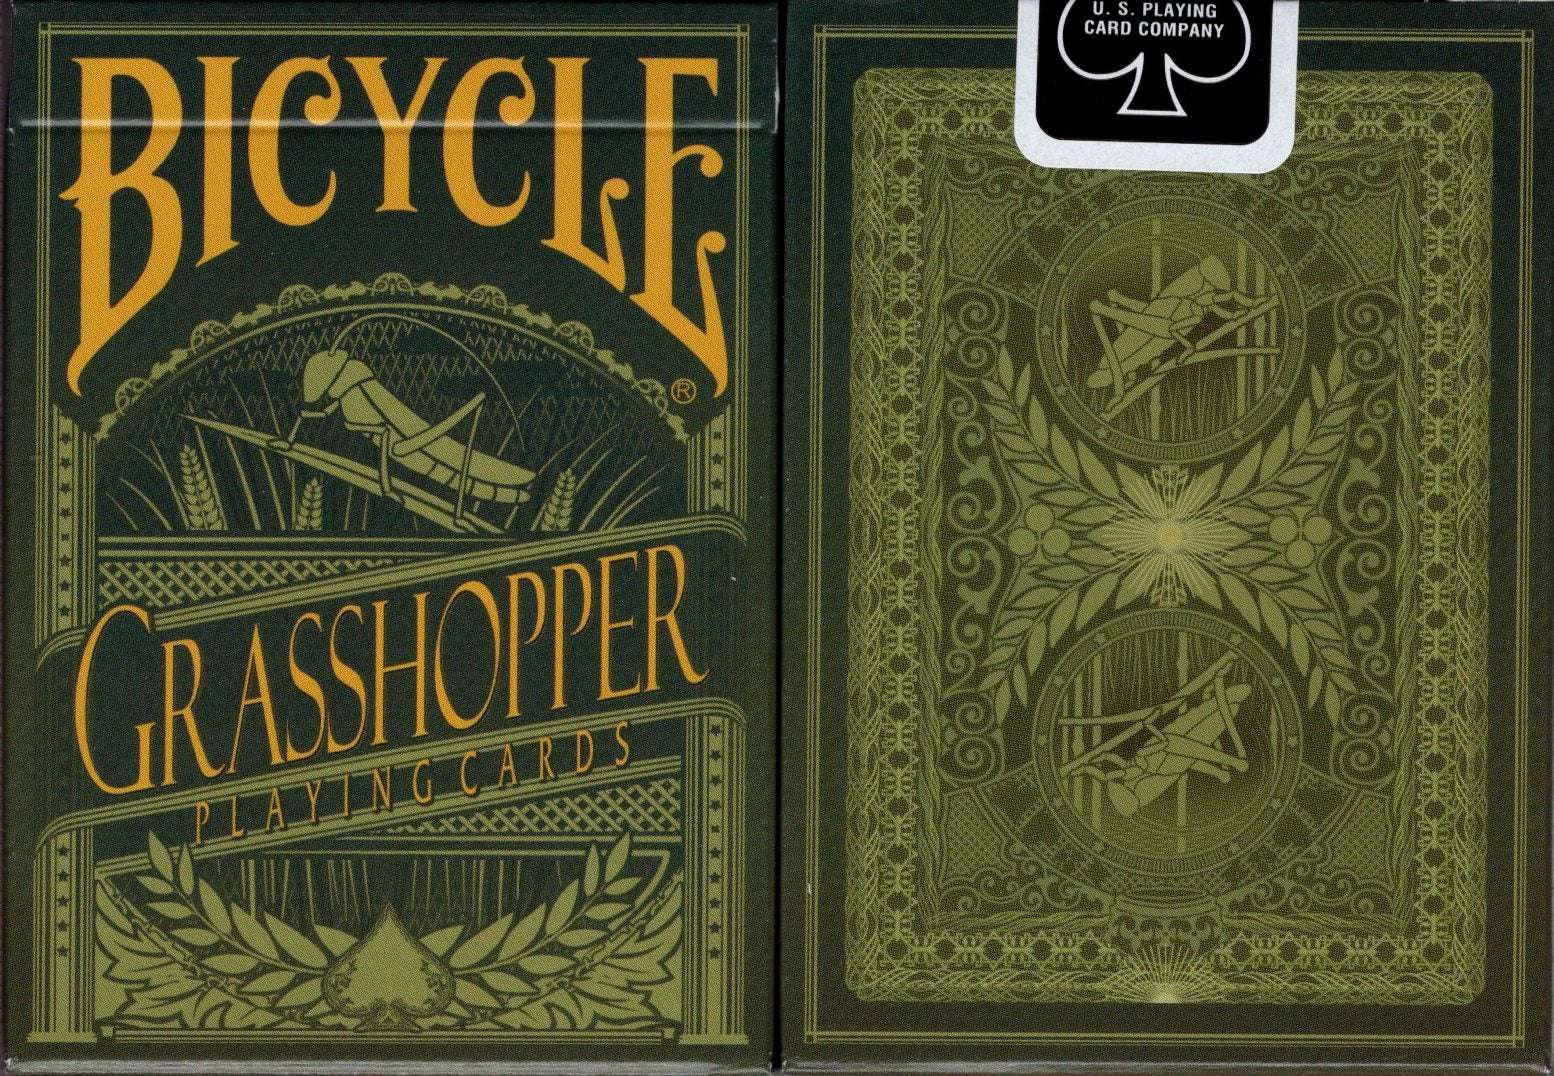 PlayingCardDecks.com-Grasshopper Bicycle Playing Cards: Olive